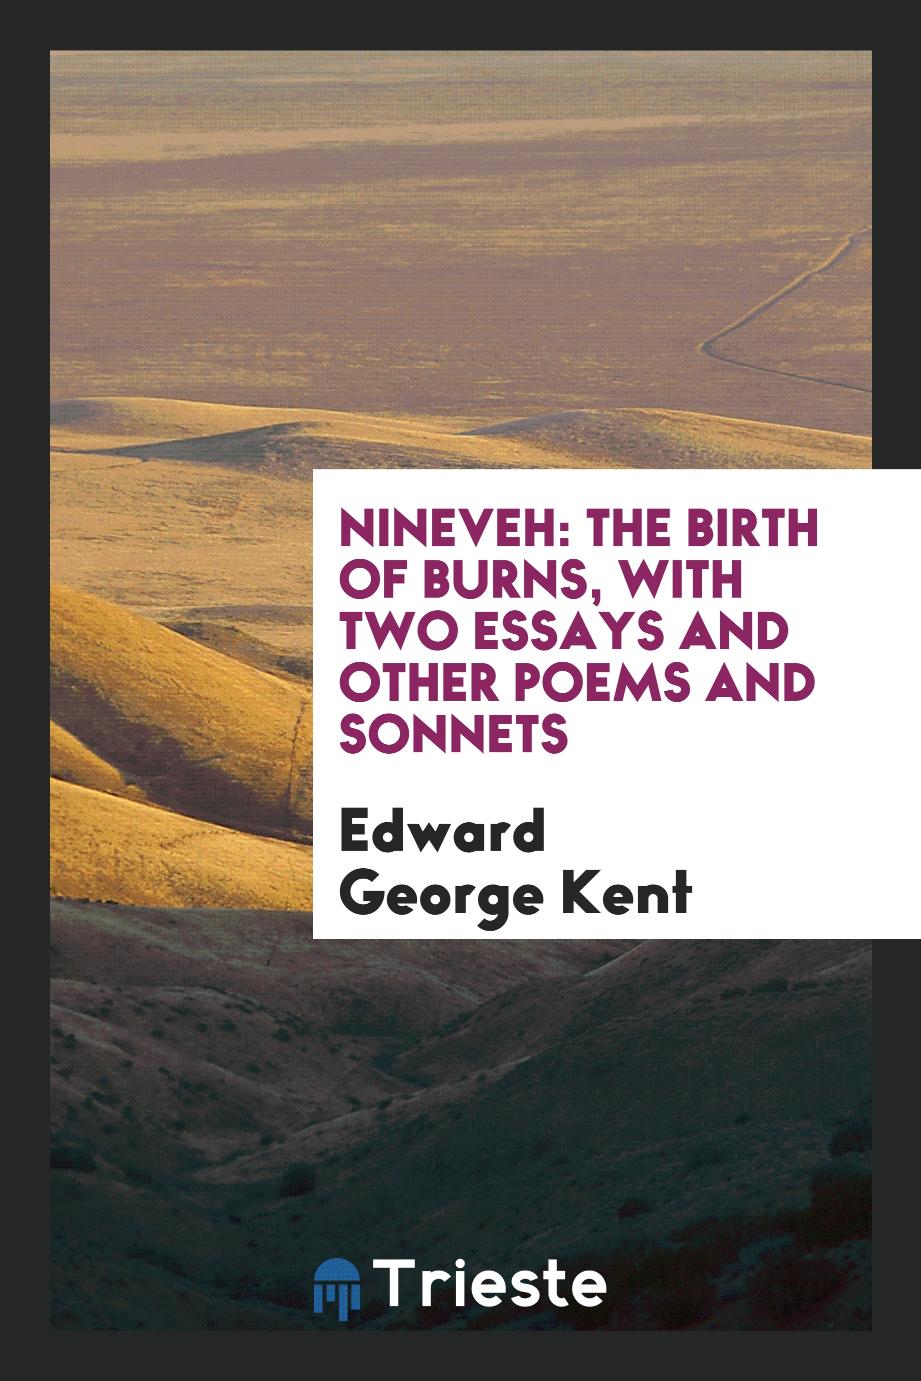 Nineveh: The Birth of Burns, with Two Essays and Other Poems and Sonnets